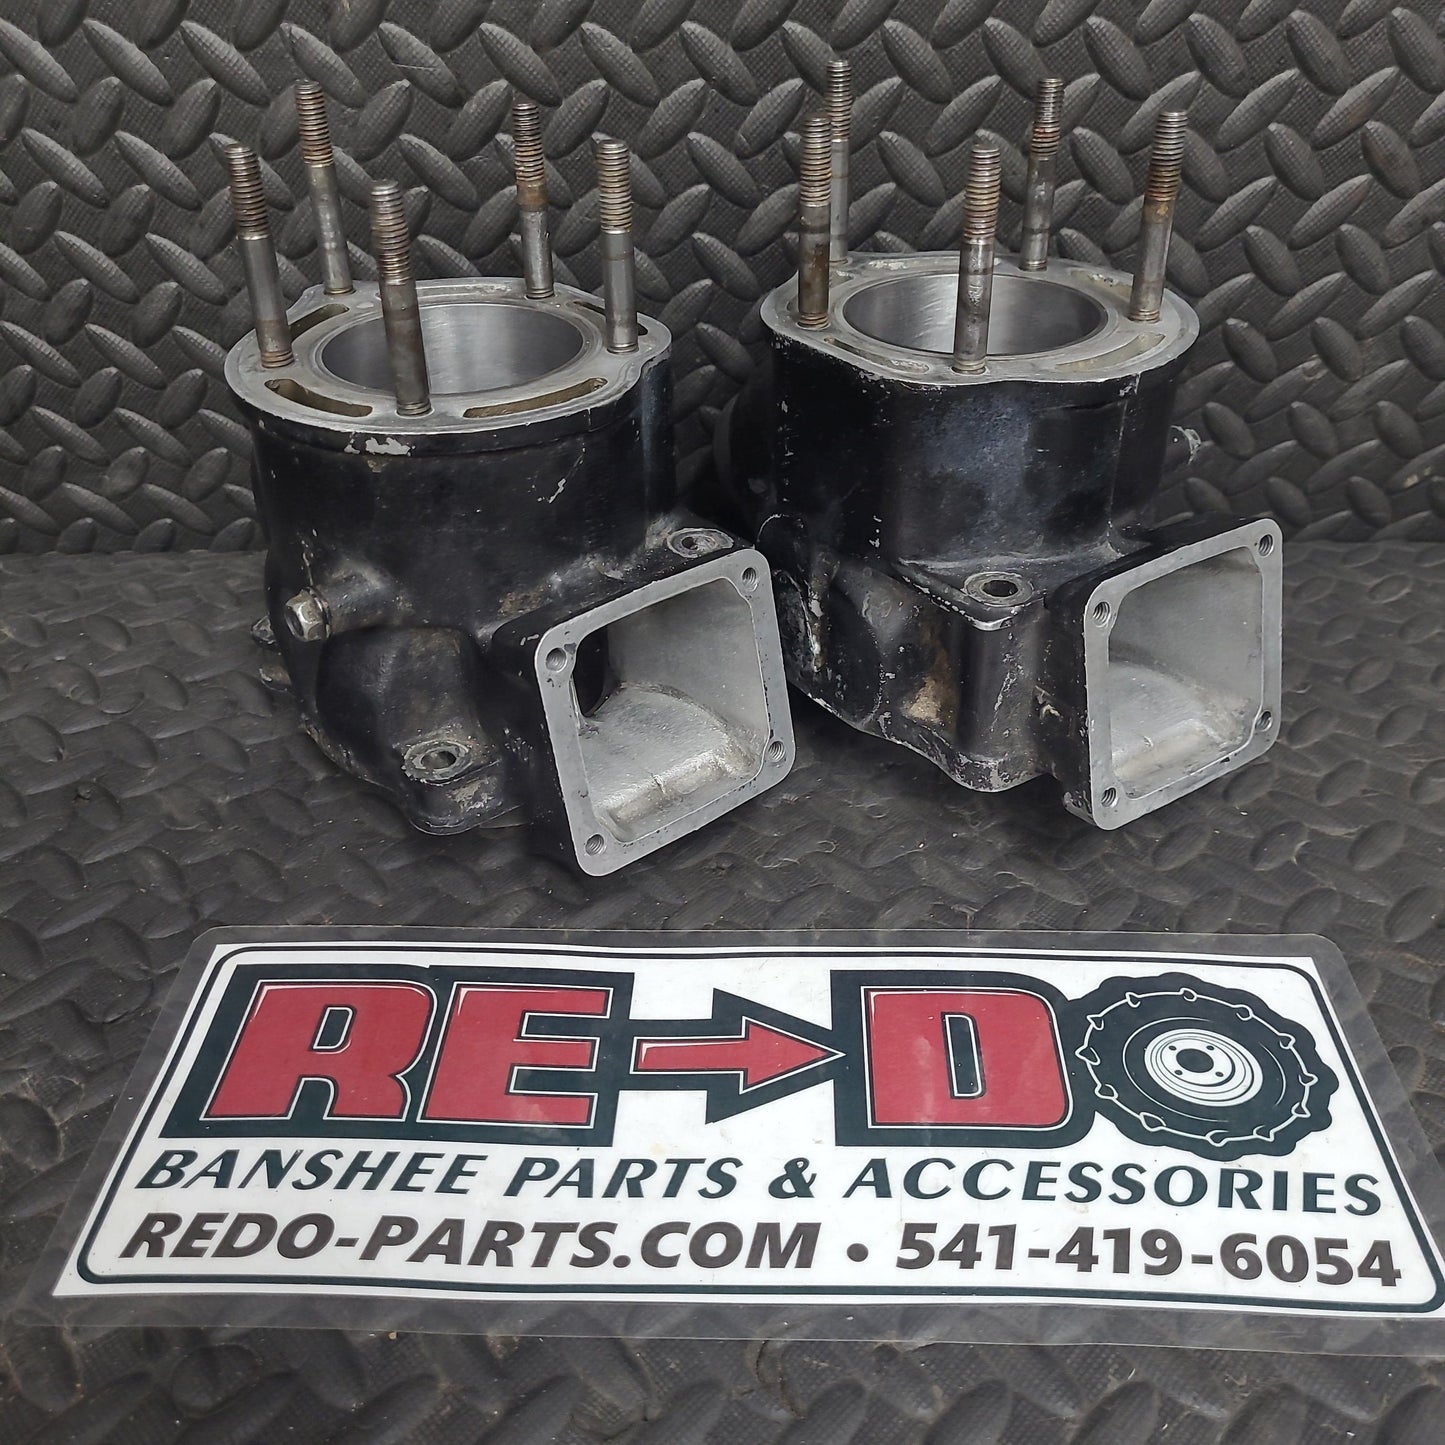 OEM Cylinders With Porting In Transfer, Cylinders And Intakes 65mm *USED*